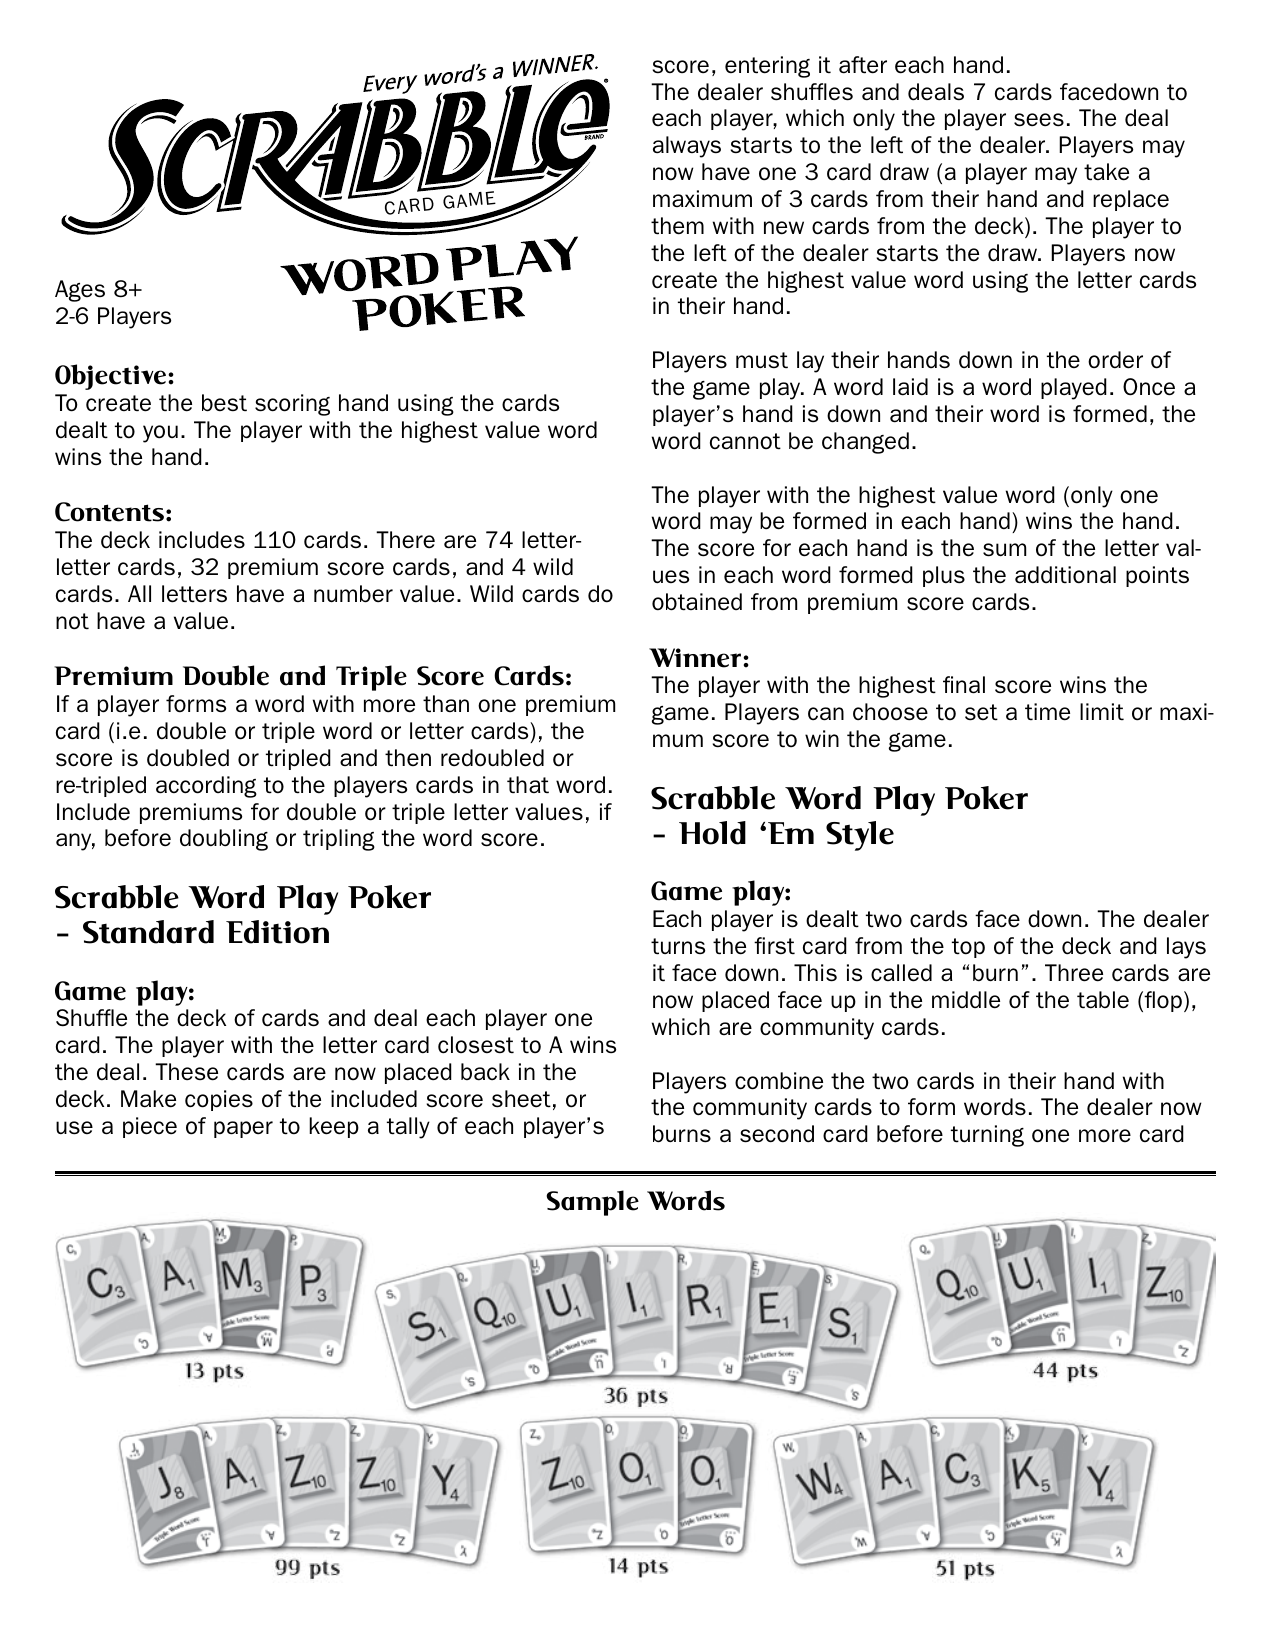 Fundex Games Scrabble Word Play Poker User Instructions Manualzz